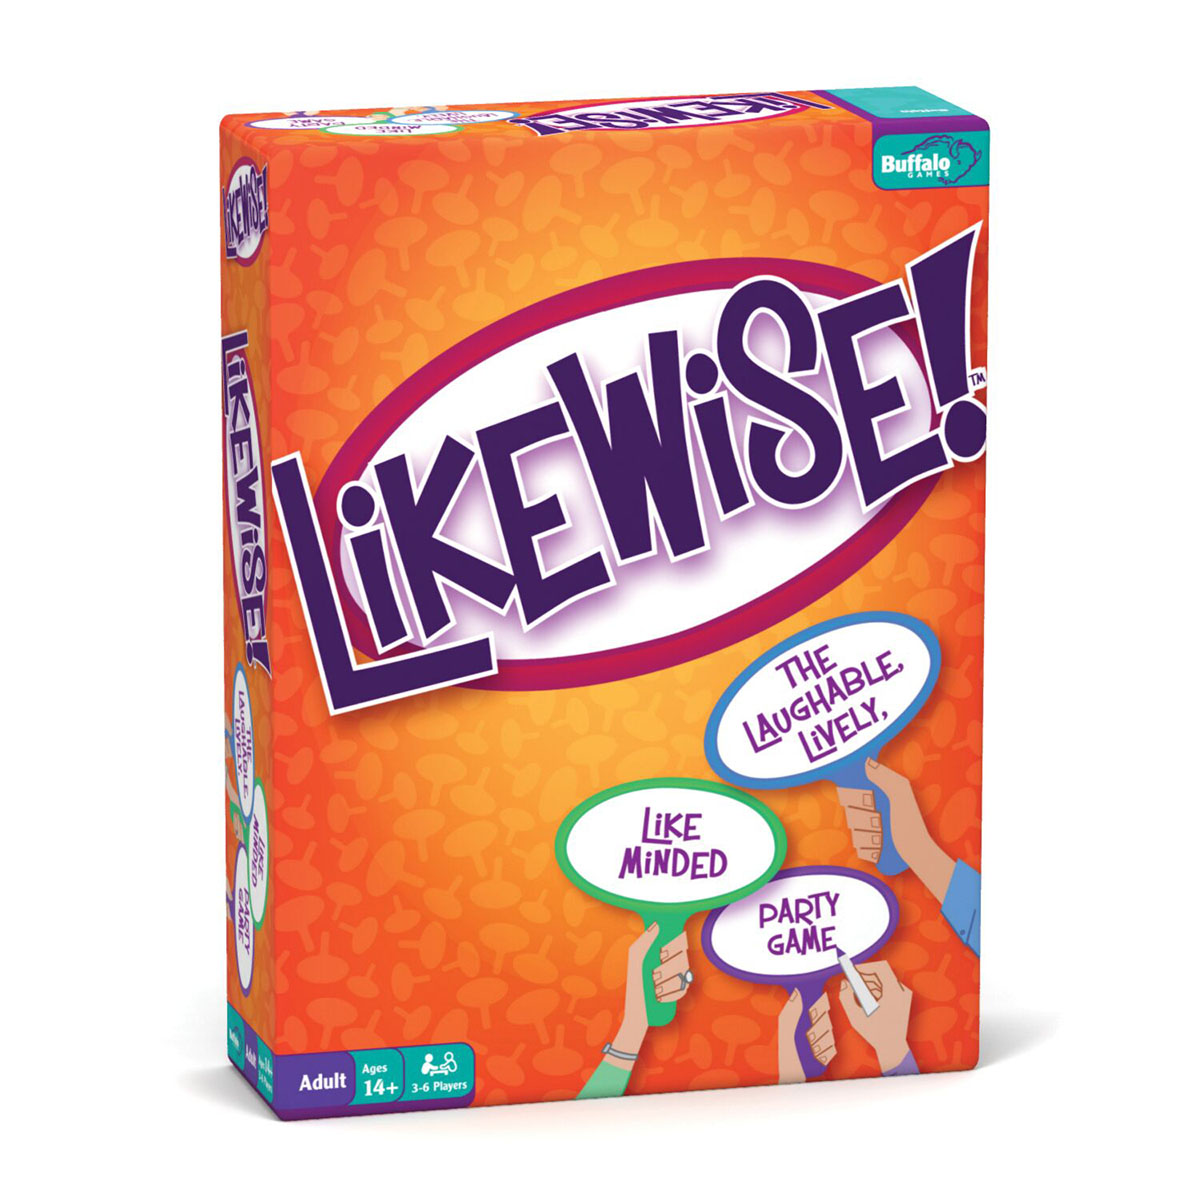 LikeWise - Scratch and Dent